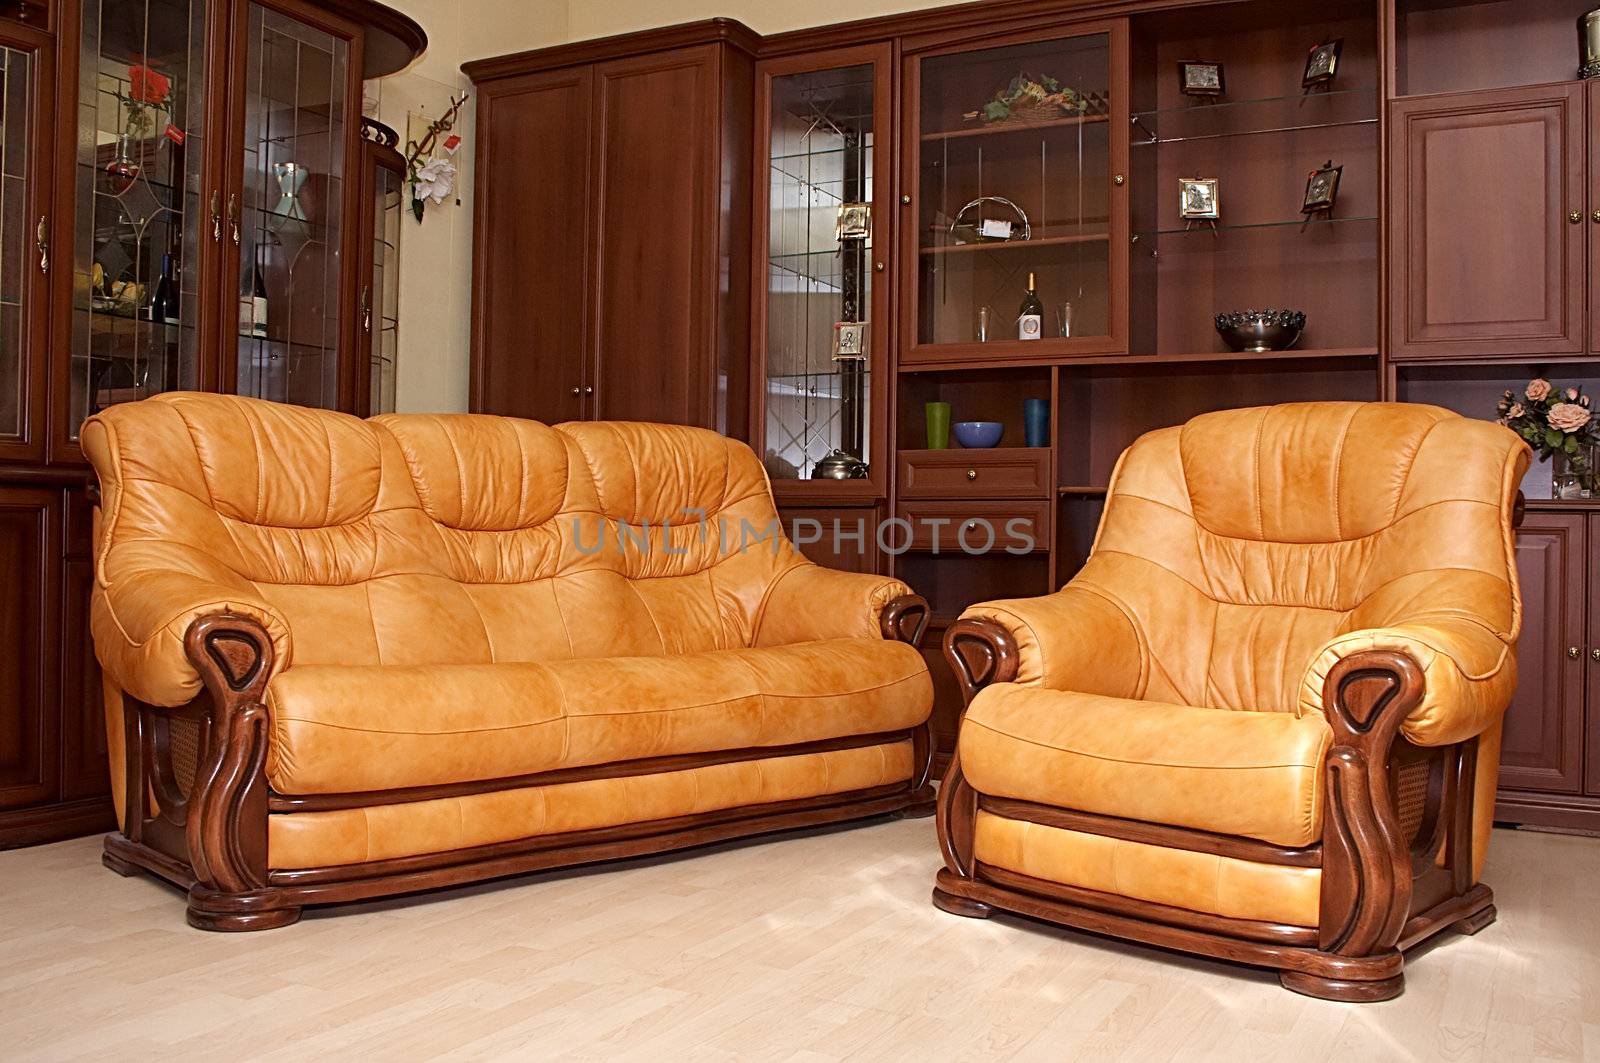 Yellow leather sofa and armchair on a parquet